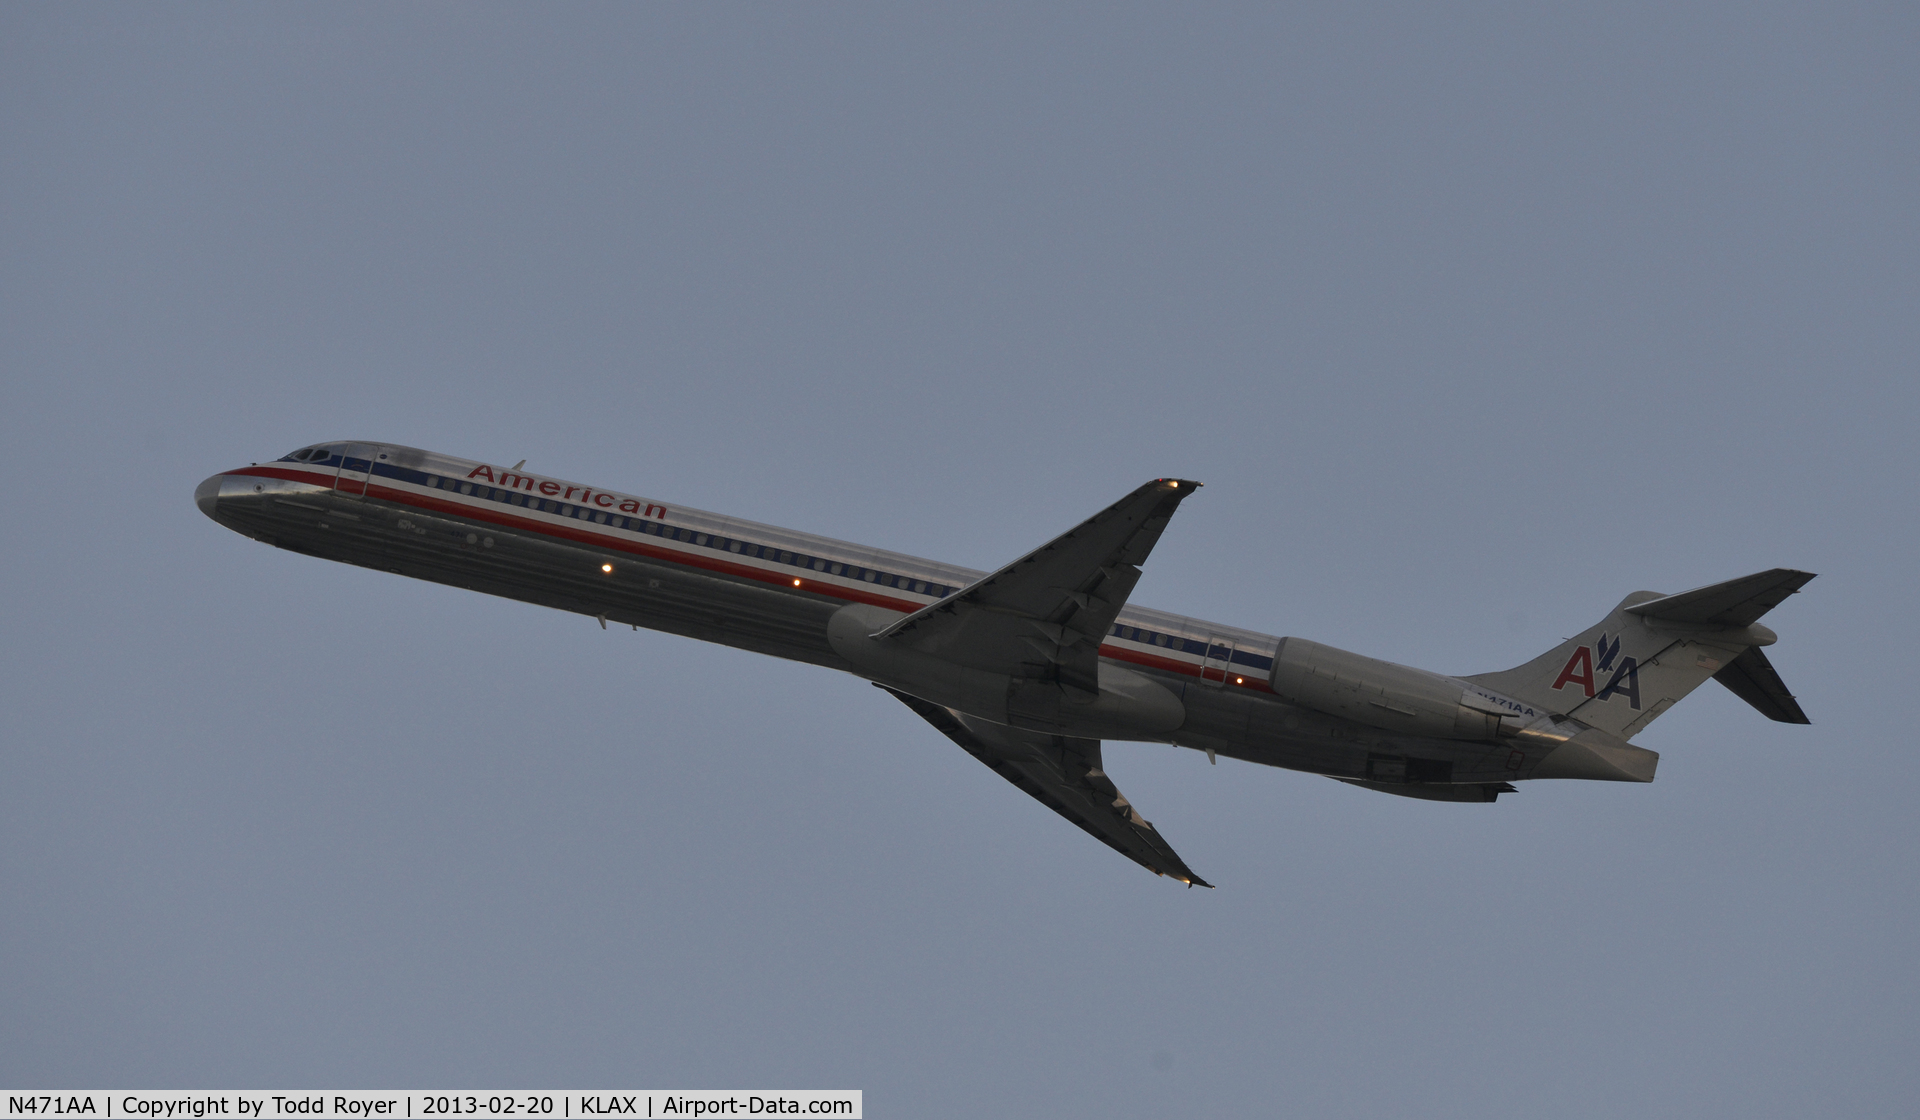 N471AA, 1988 McDonnell Douglas MD-82 (DC-9-82) C/N 49601, Early morning departure from LAX